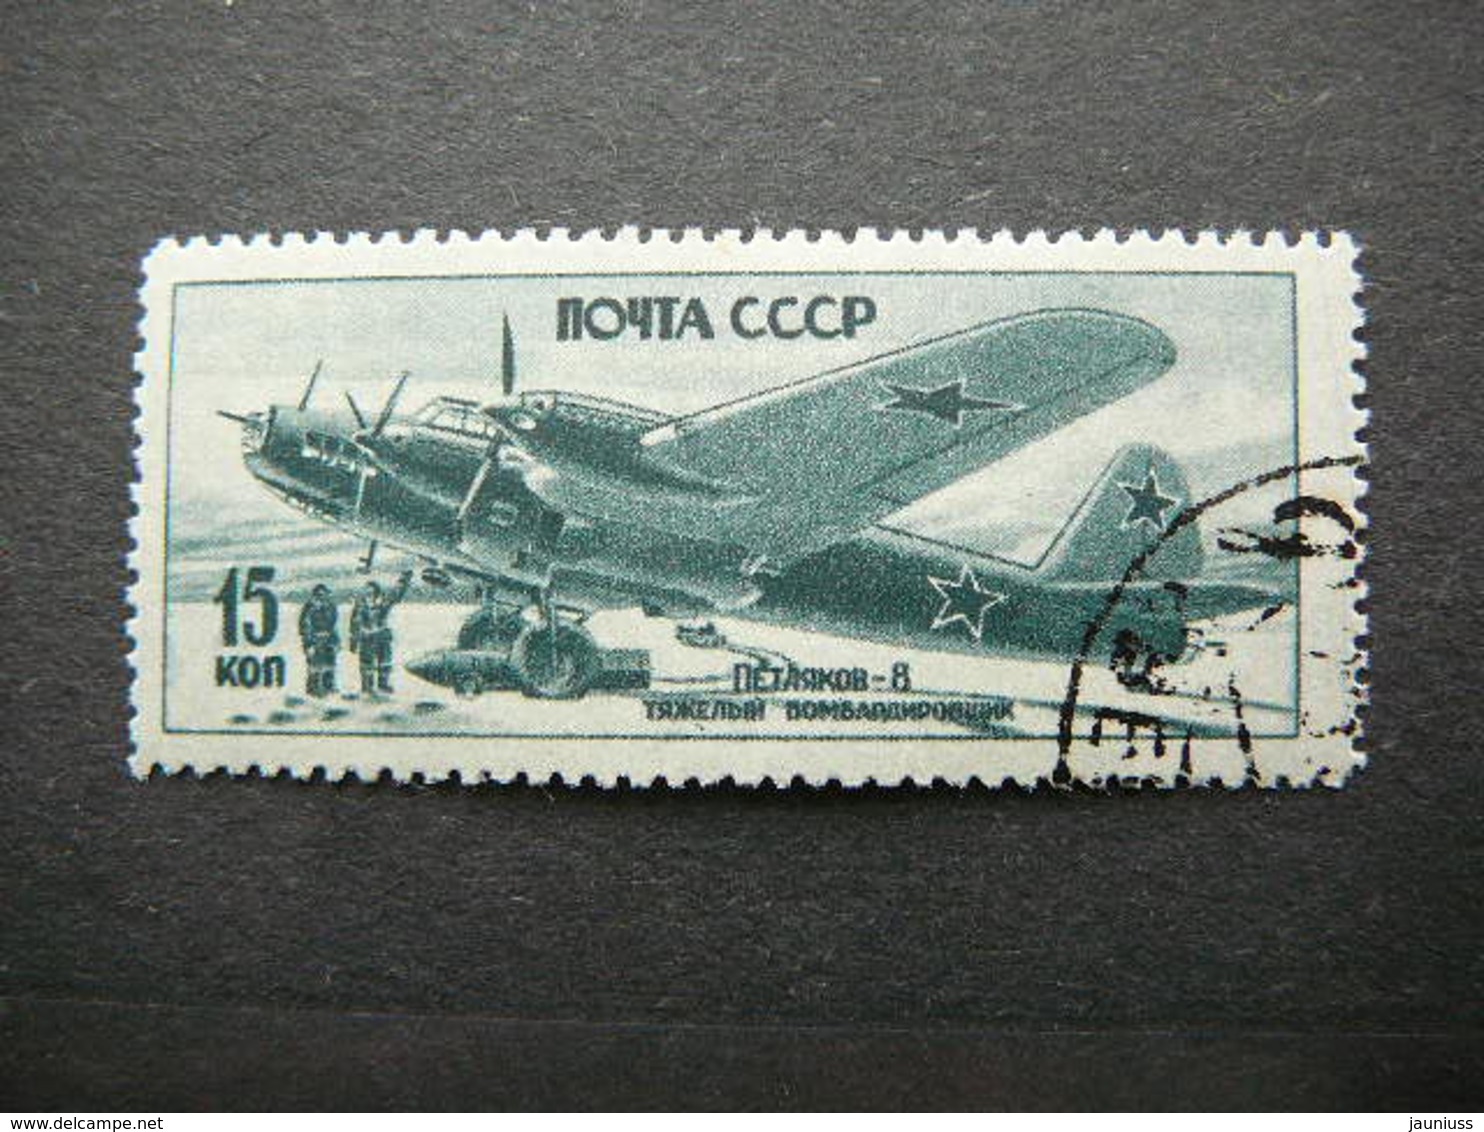 Air Forces During World War II # Russia USSR Sowjetunion # 1946 Used #Mi. 1017 Planes - Oblitérés